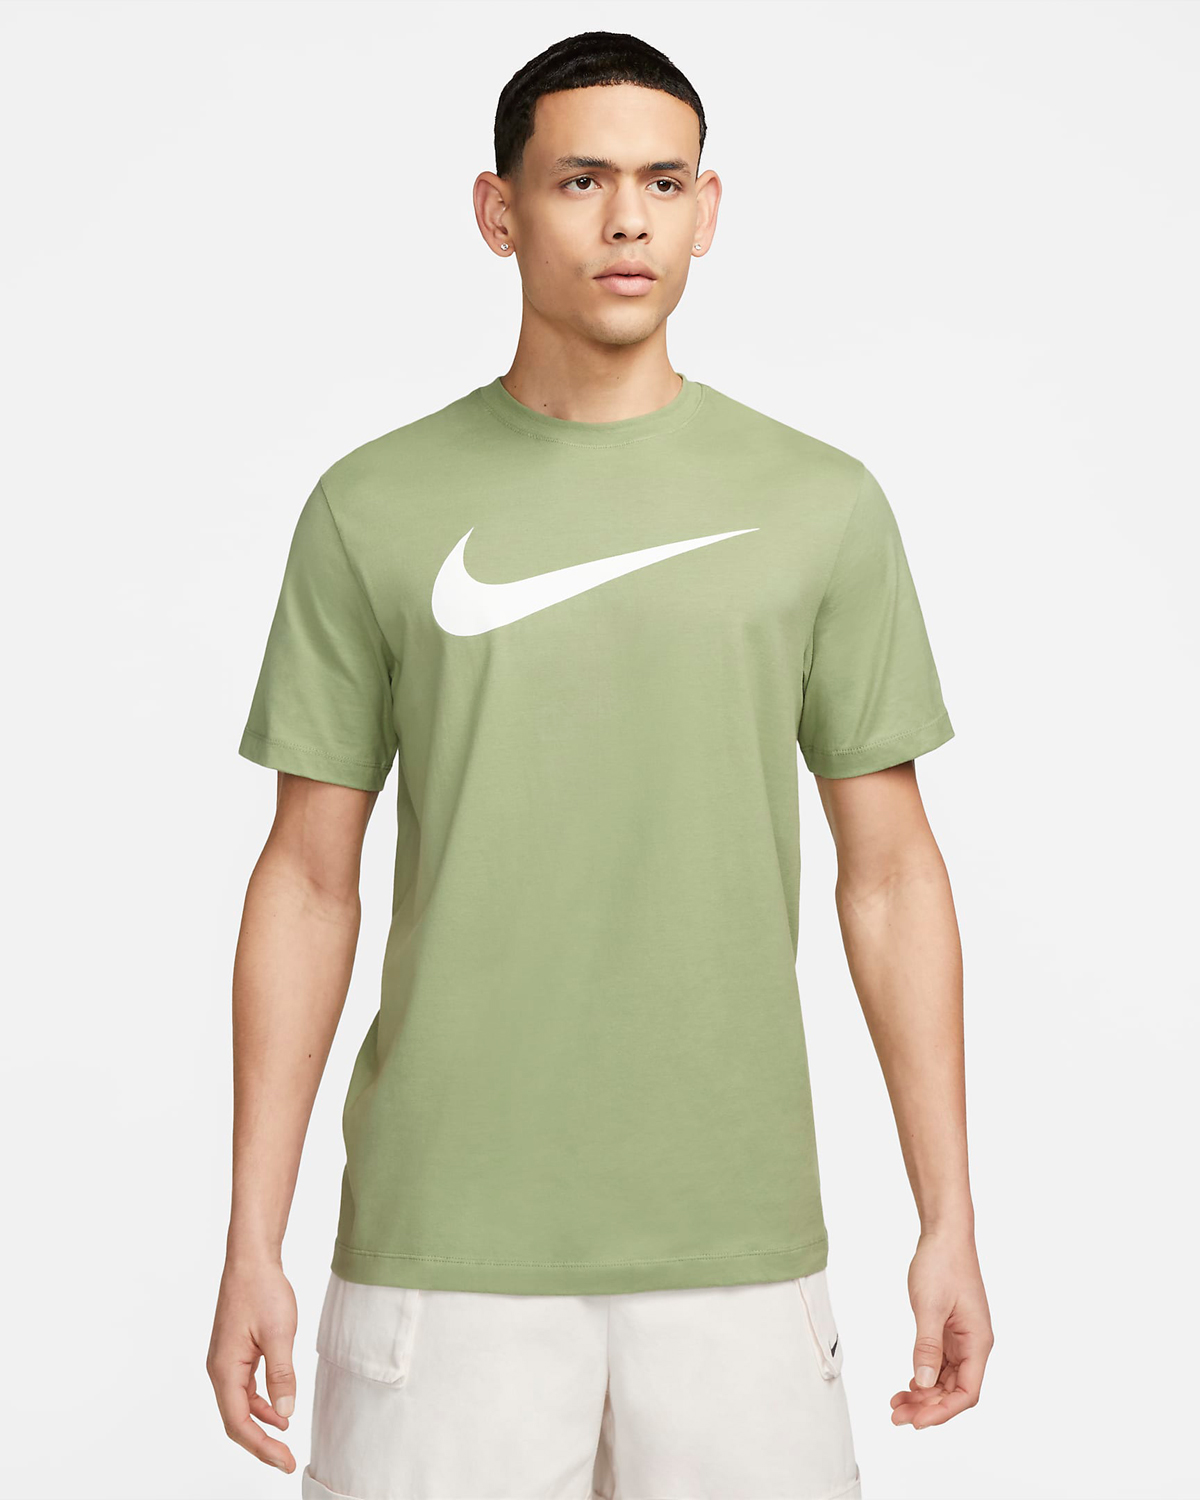 Nike Air Force 1 Low Jewel Oil Green Shirts Clothing Outfits